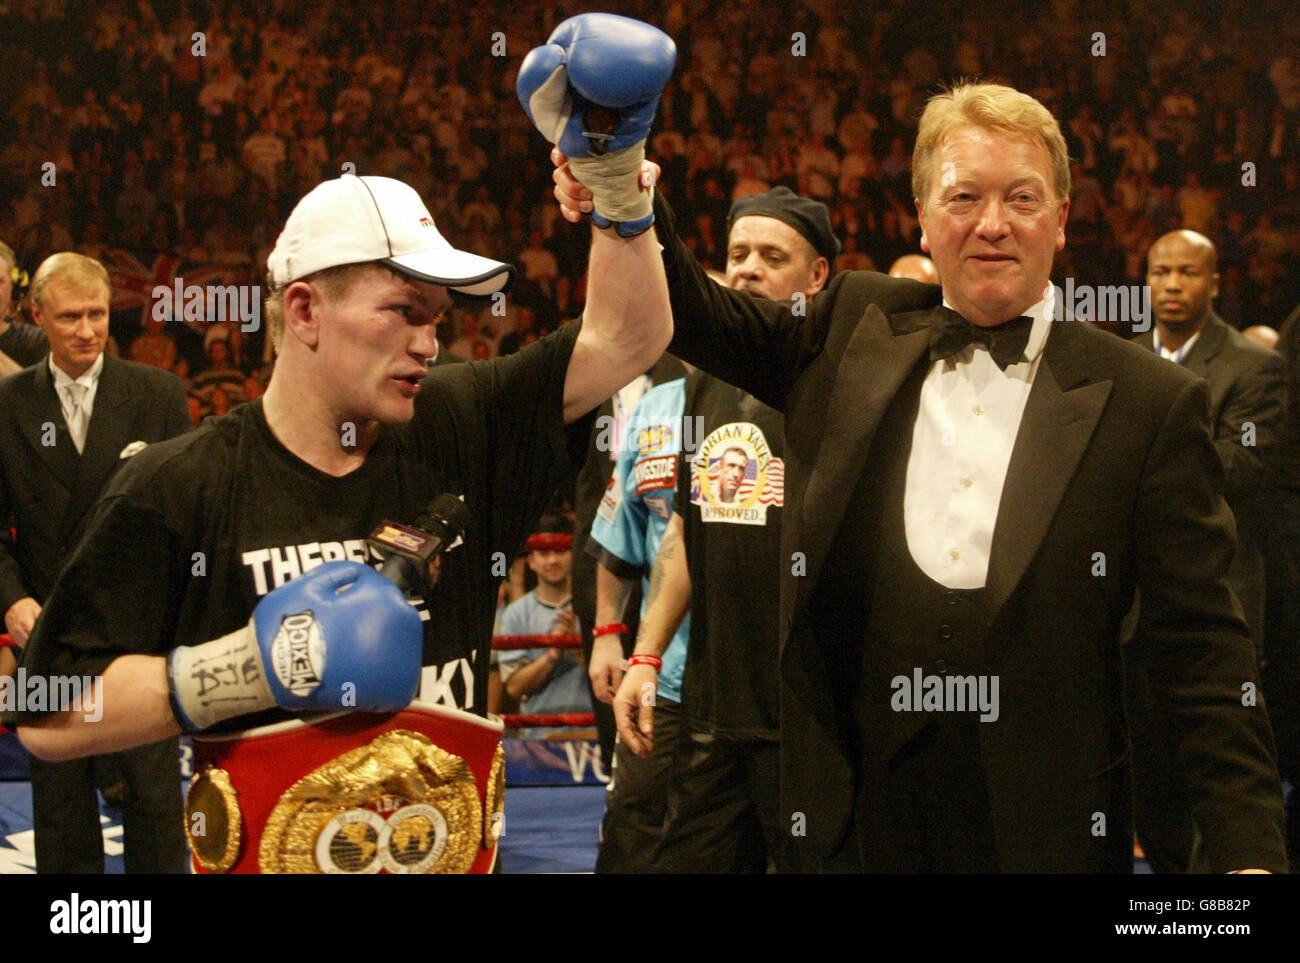 Ricky Hatton has his arm lifted by promoter Frank Warren as they celebrate victory over Kostya Tszyu. Stock Photo